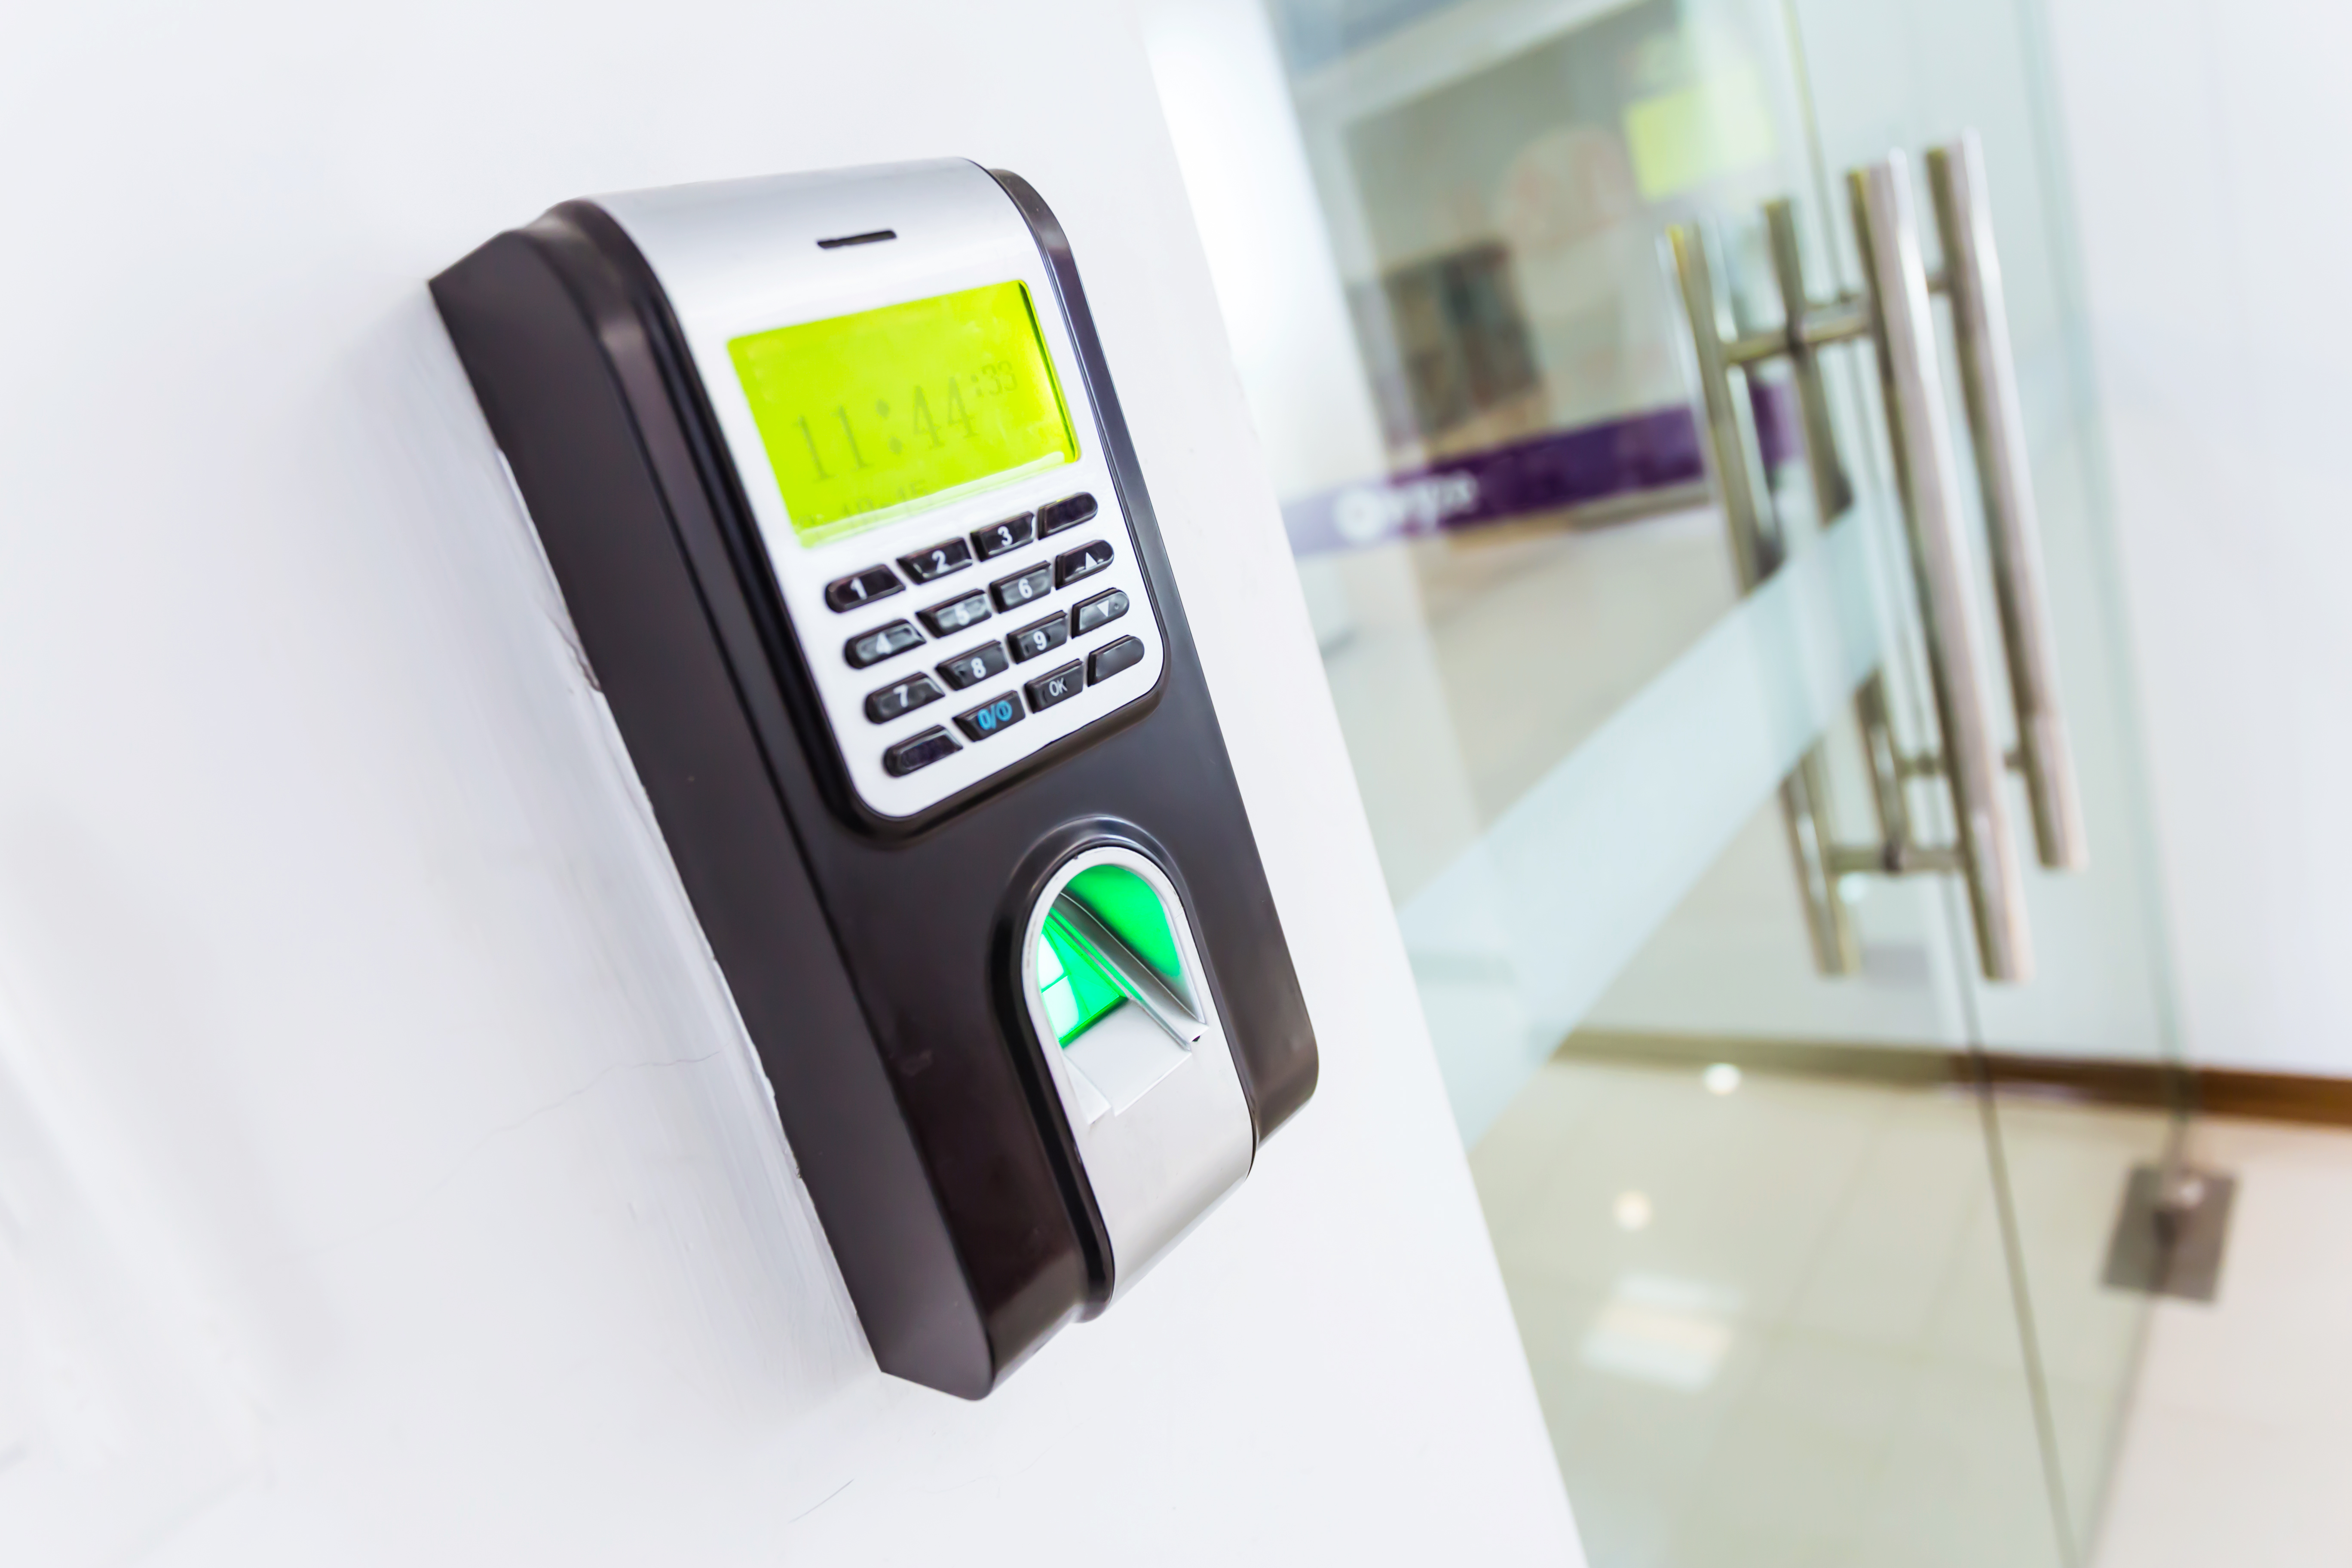 keypad for access control